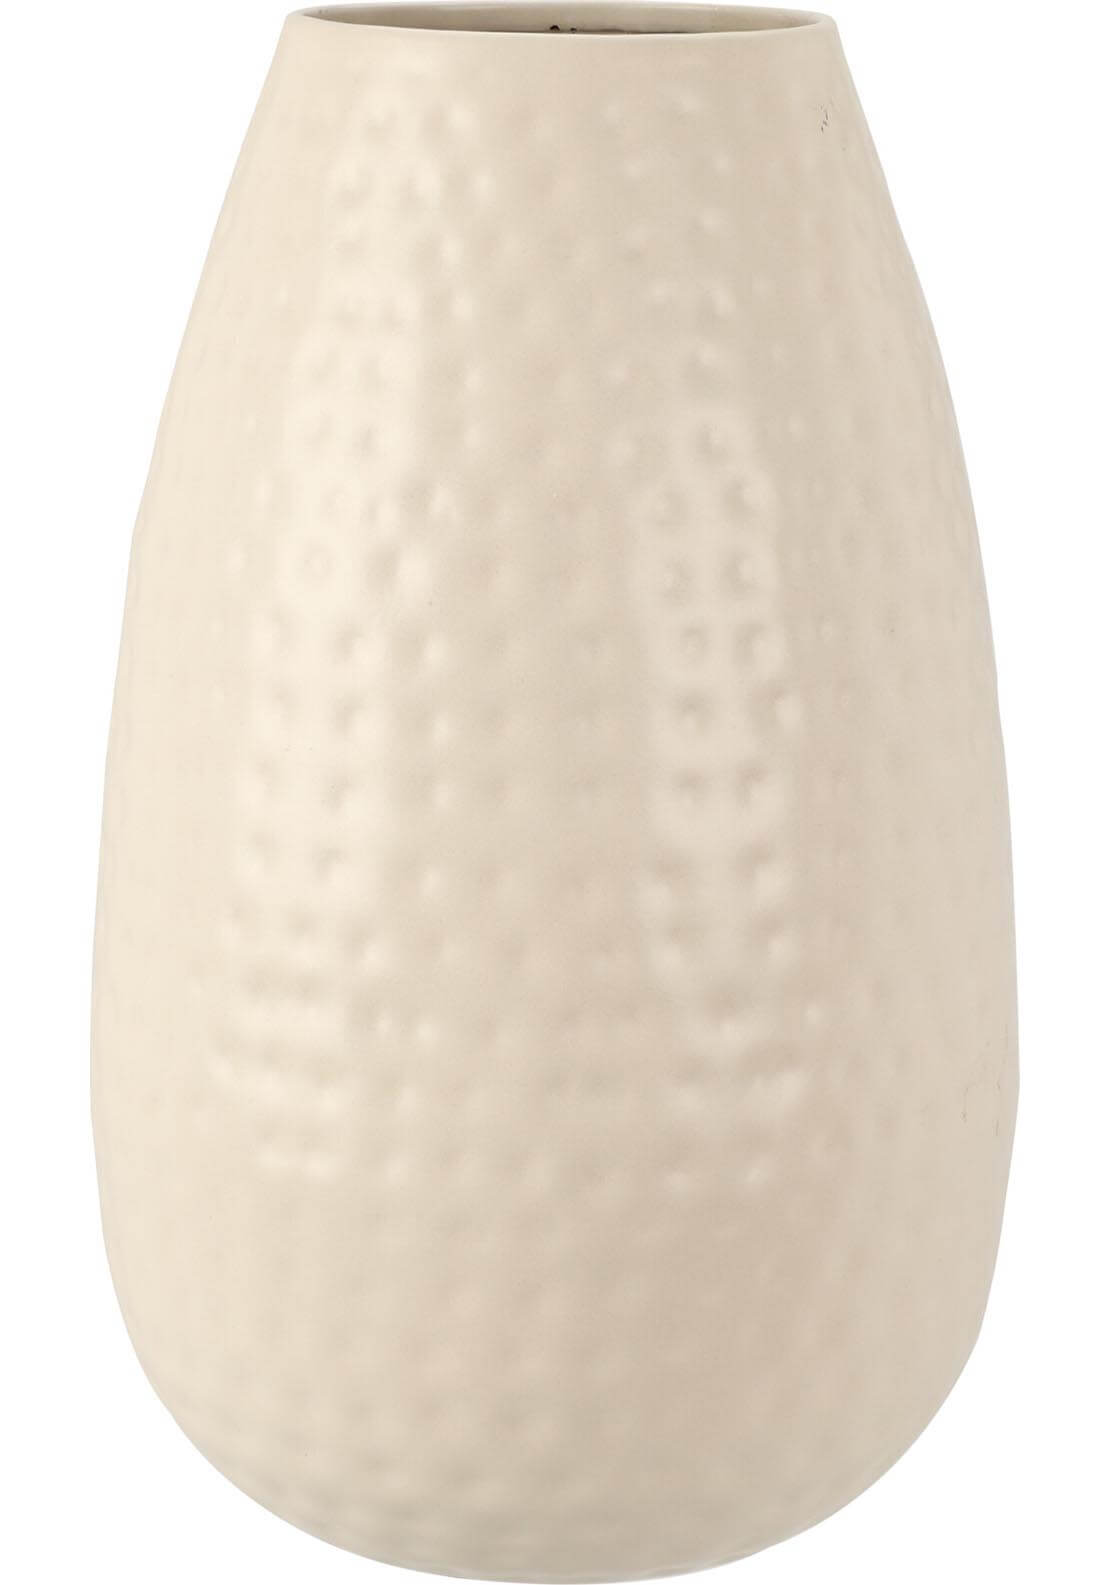 The Home Living Vase Decorative 180mm x 180mm x 300mm 1 Shaws Department Stores